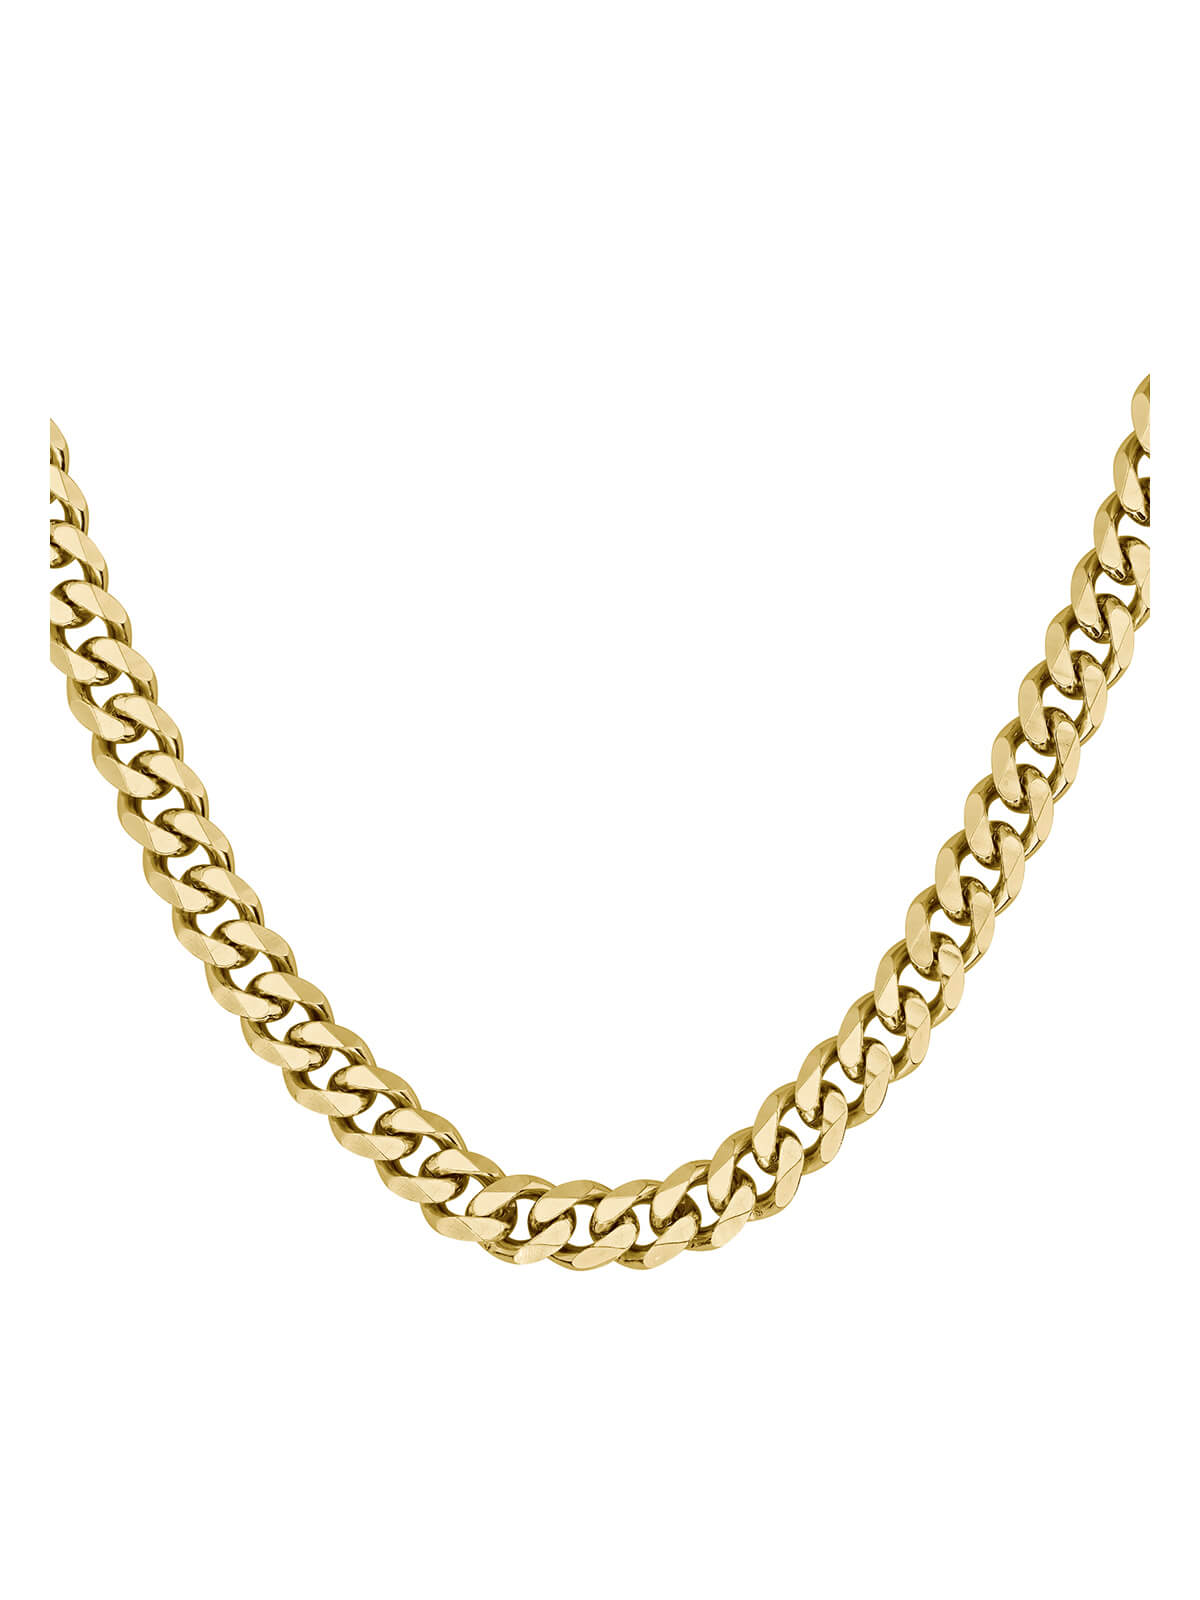 BOSS Chain For Him Necklace in Gold Plating 1580402